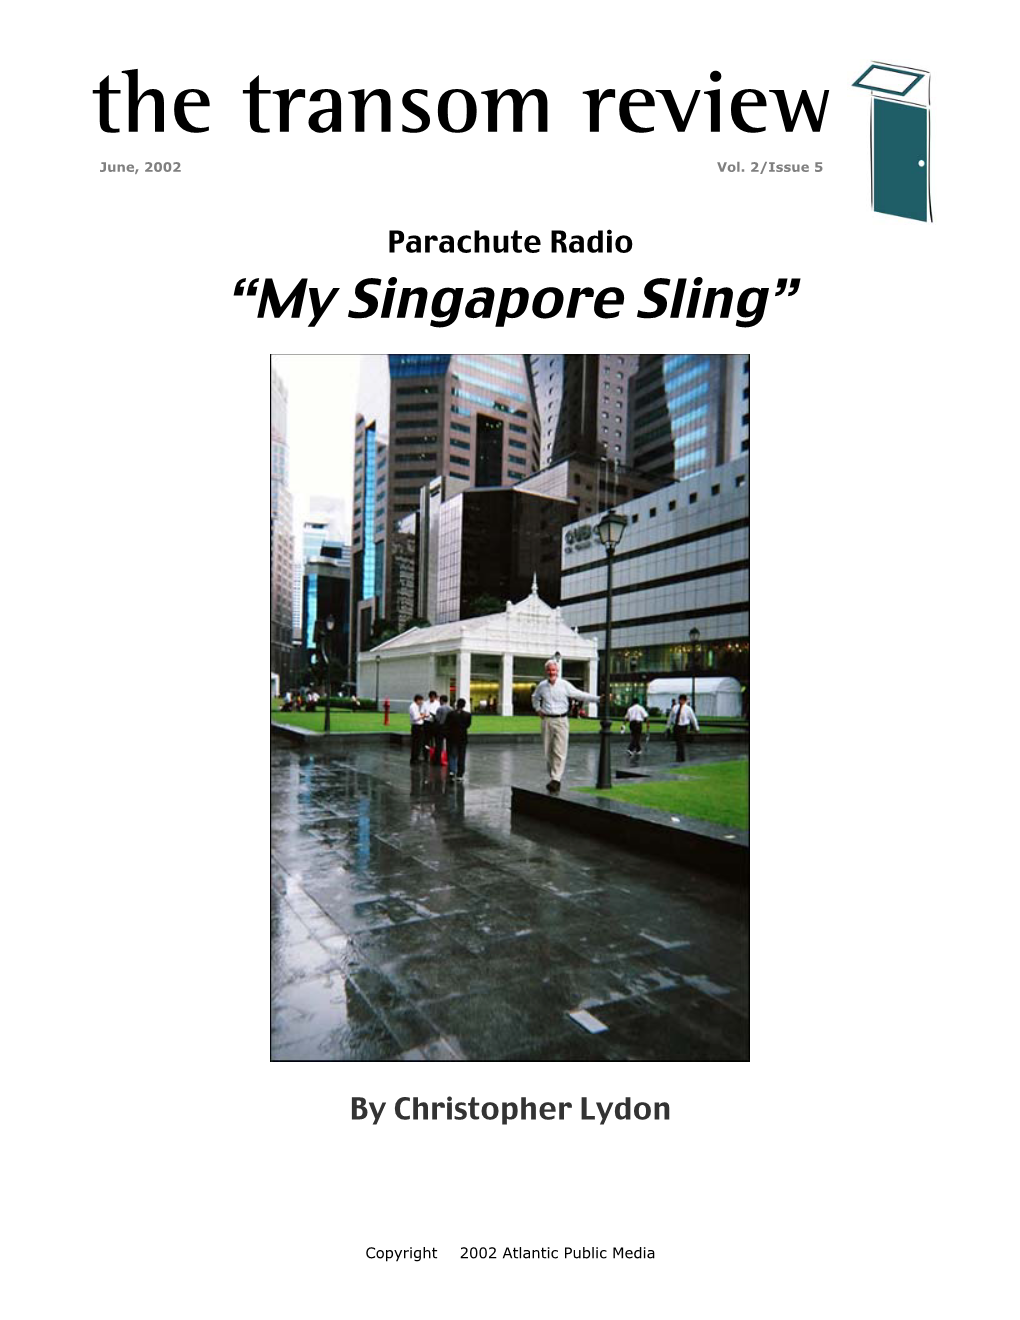 Transom Review: Parachute Radio in Singapore